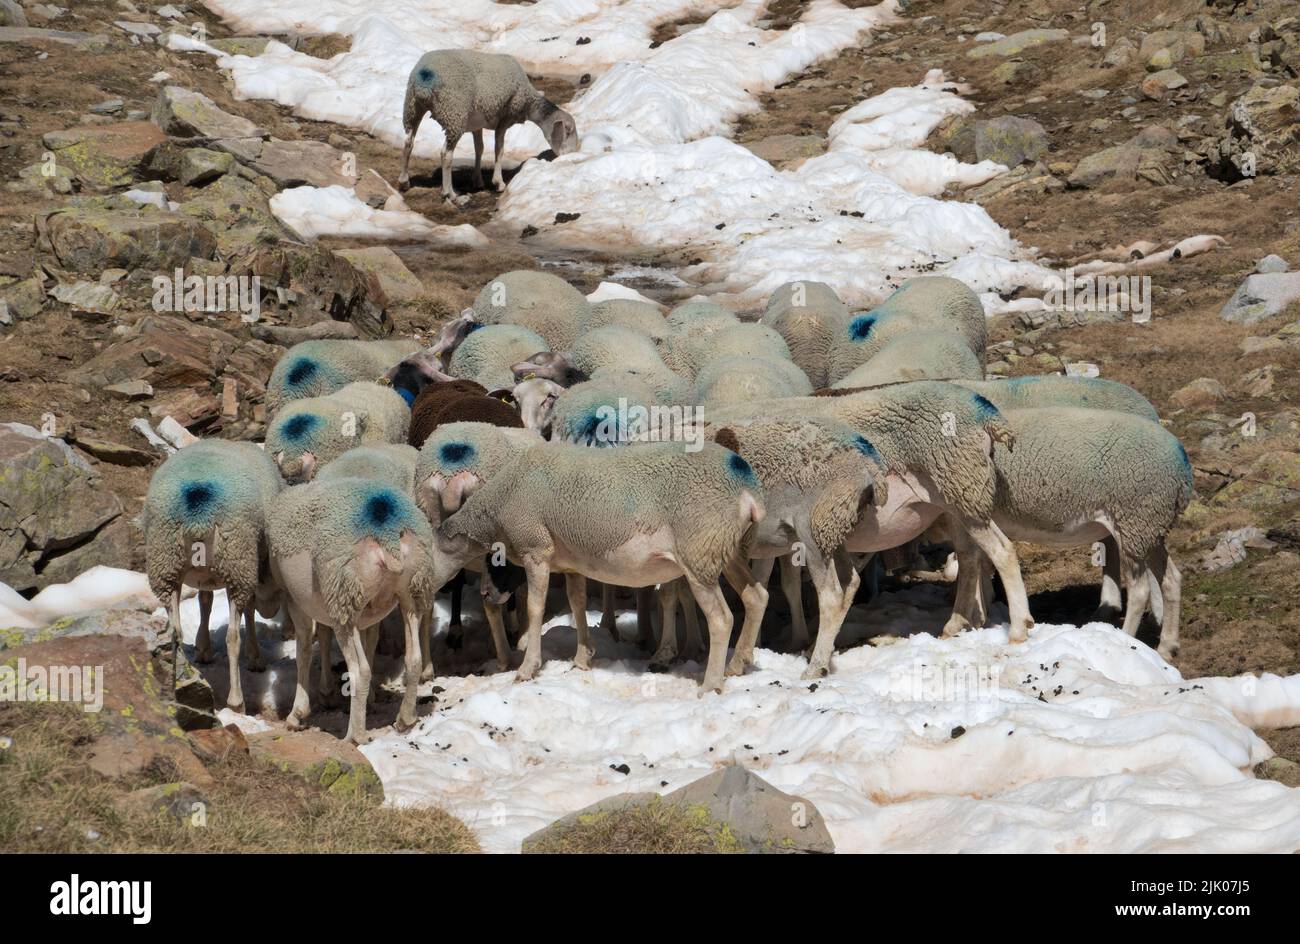 Flock of sheep in the mountains, marked with blue dots, cooling off on snow on hot day Stock Photo